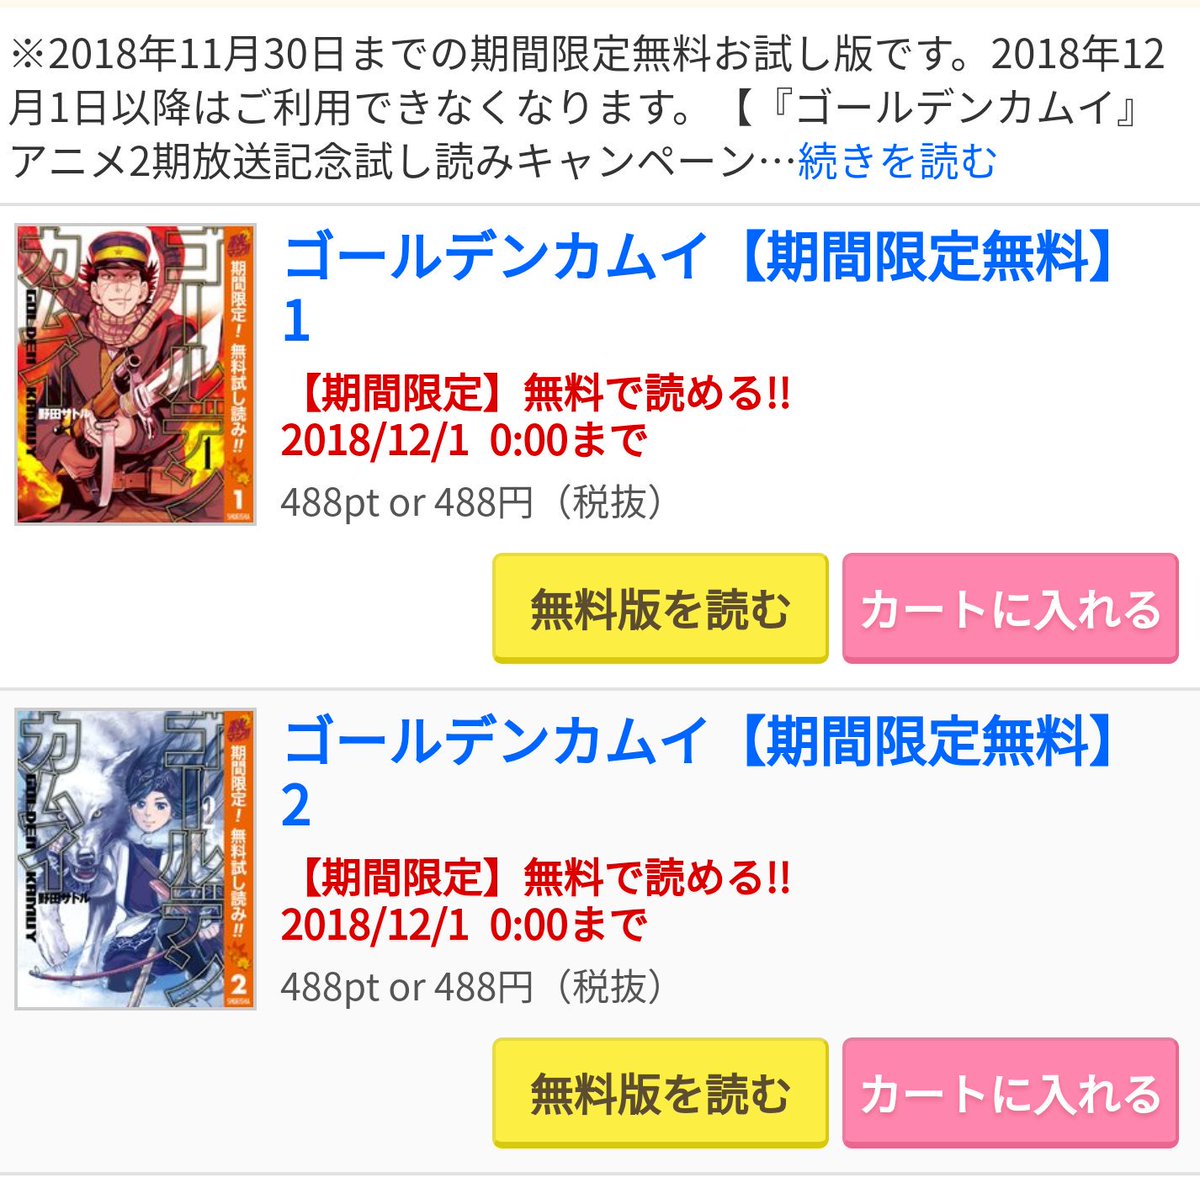 Golden Kamuy Central 2 Volumes Of Golden Kamuy In Japanese Can Currently Be Read For Free At Cmoa So Is The First Volume Of Dorokei The Young Jump Manga That